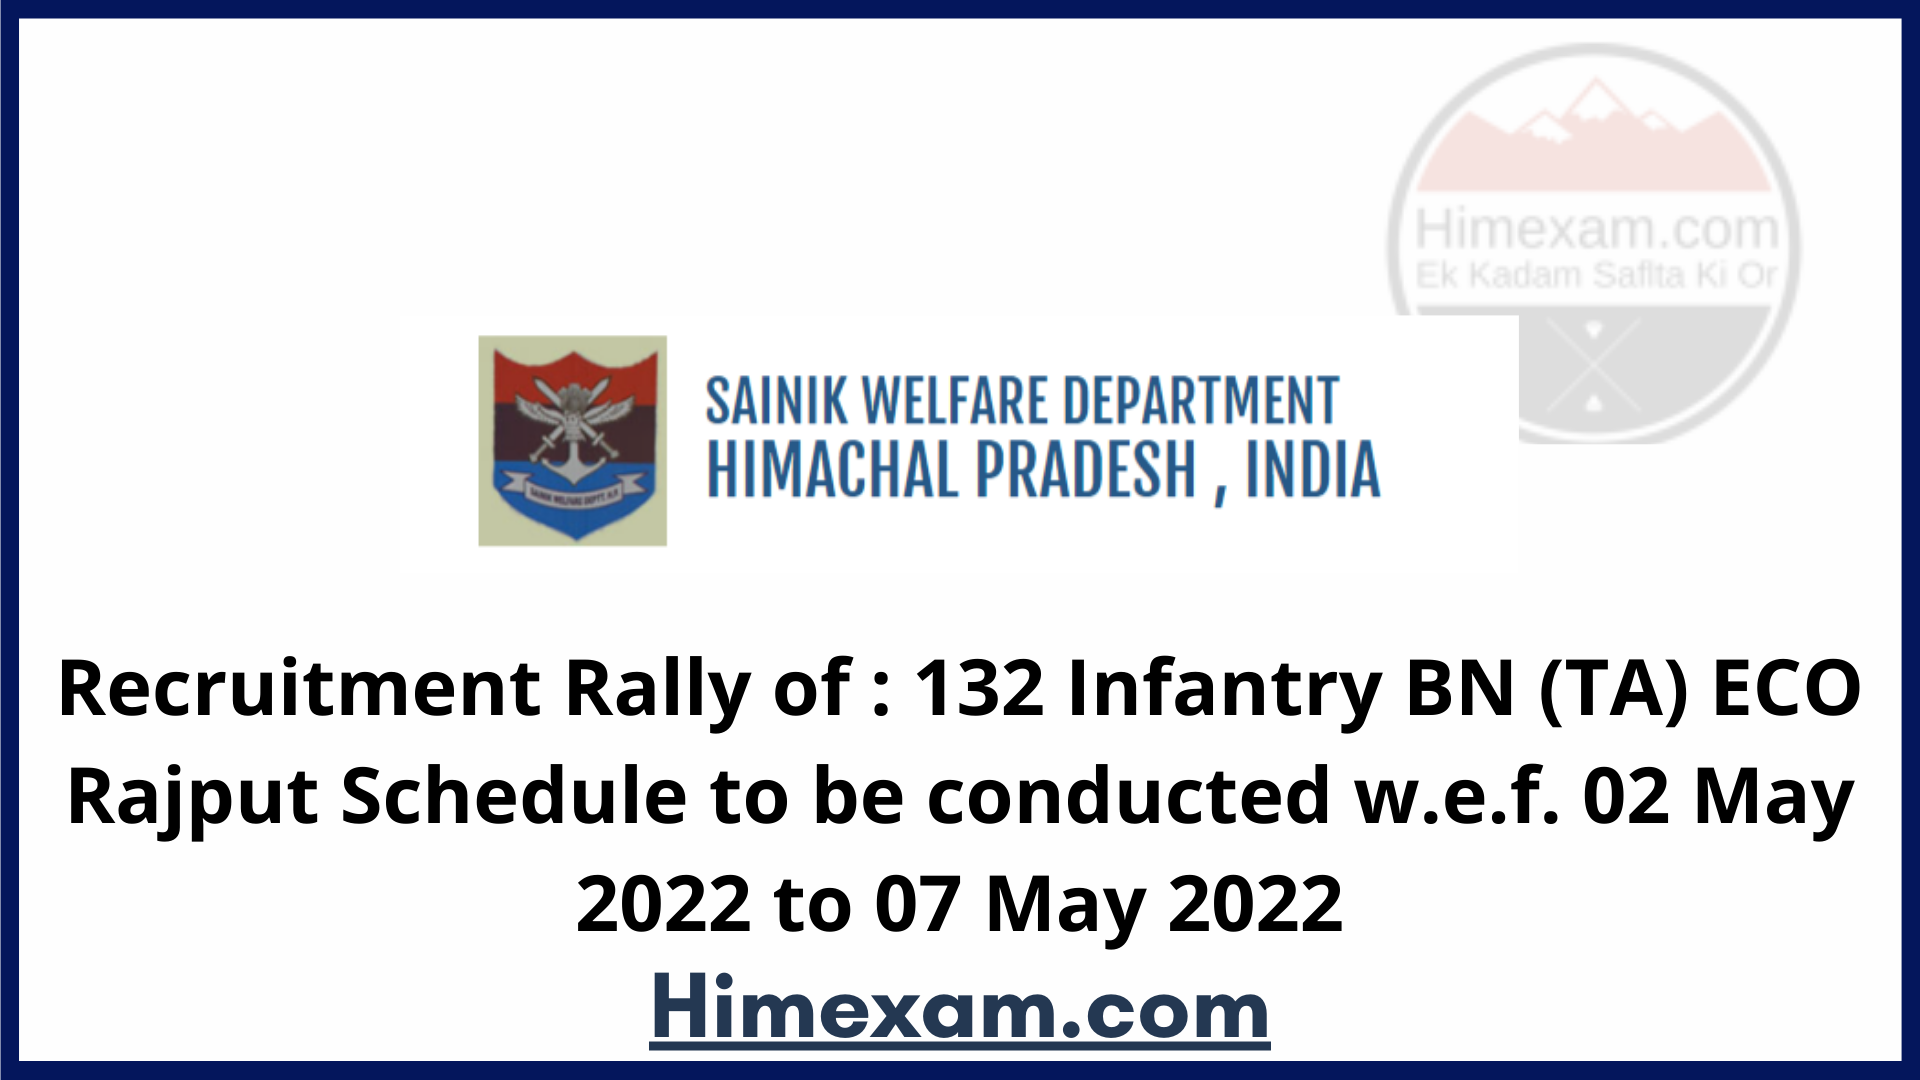 Recruitment Rally of : 132 Infantry BN (TA) ECO Rajput Schedule to be conducted w.e.f. 02 May 2022 to 07 May 2022